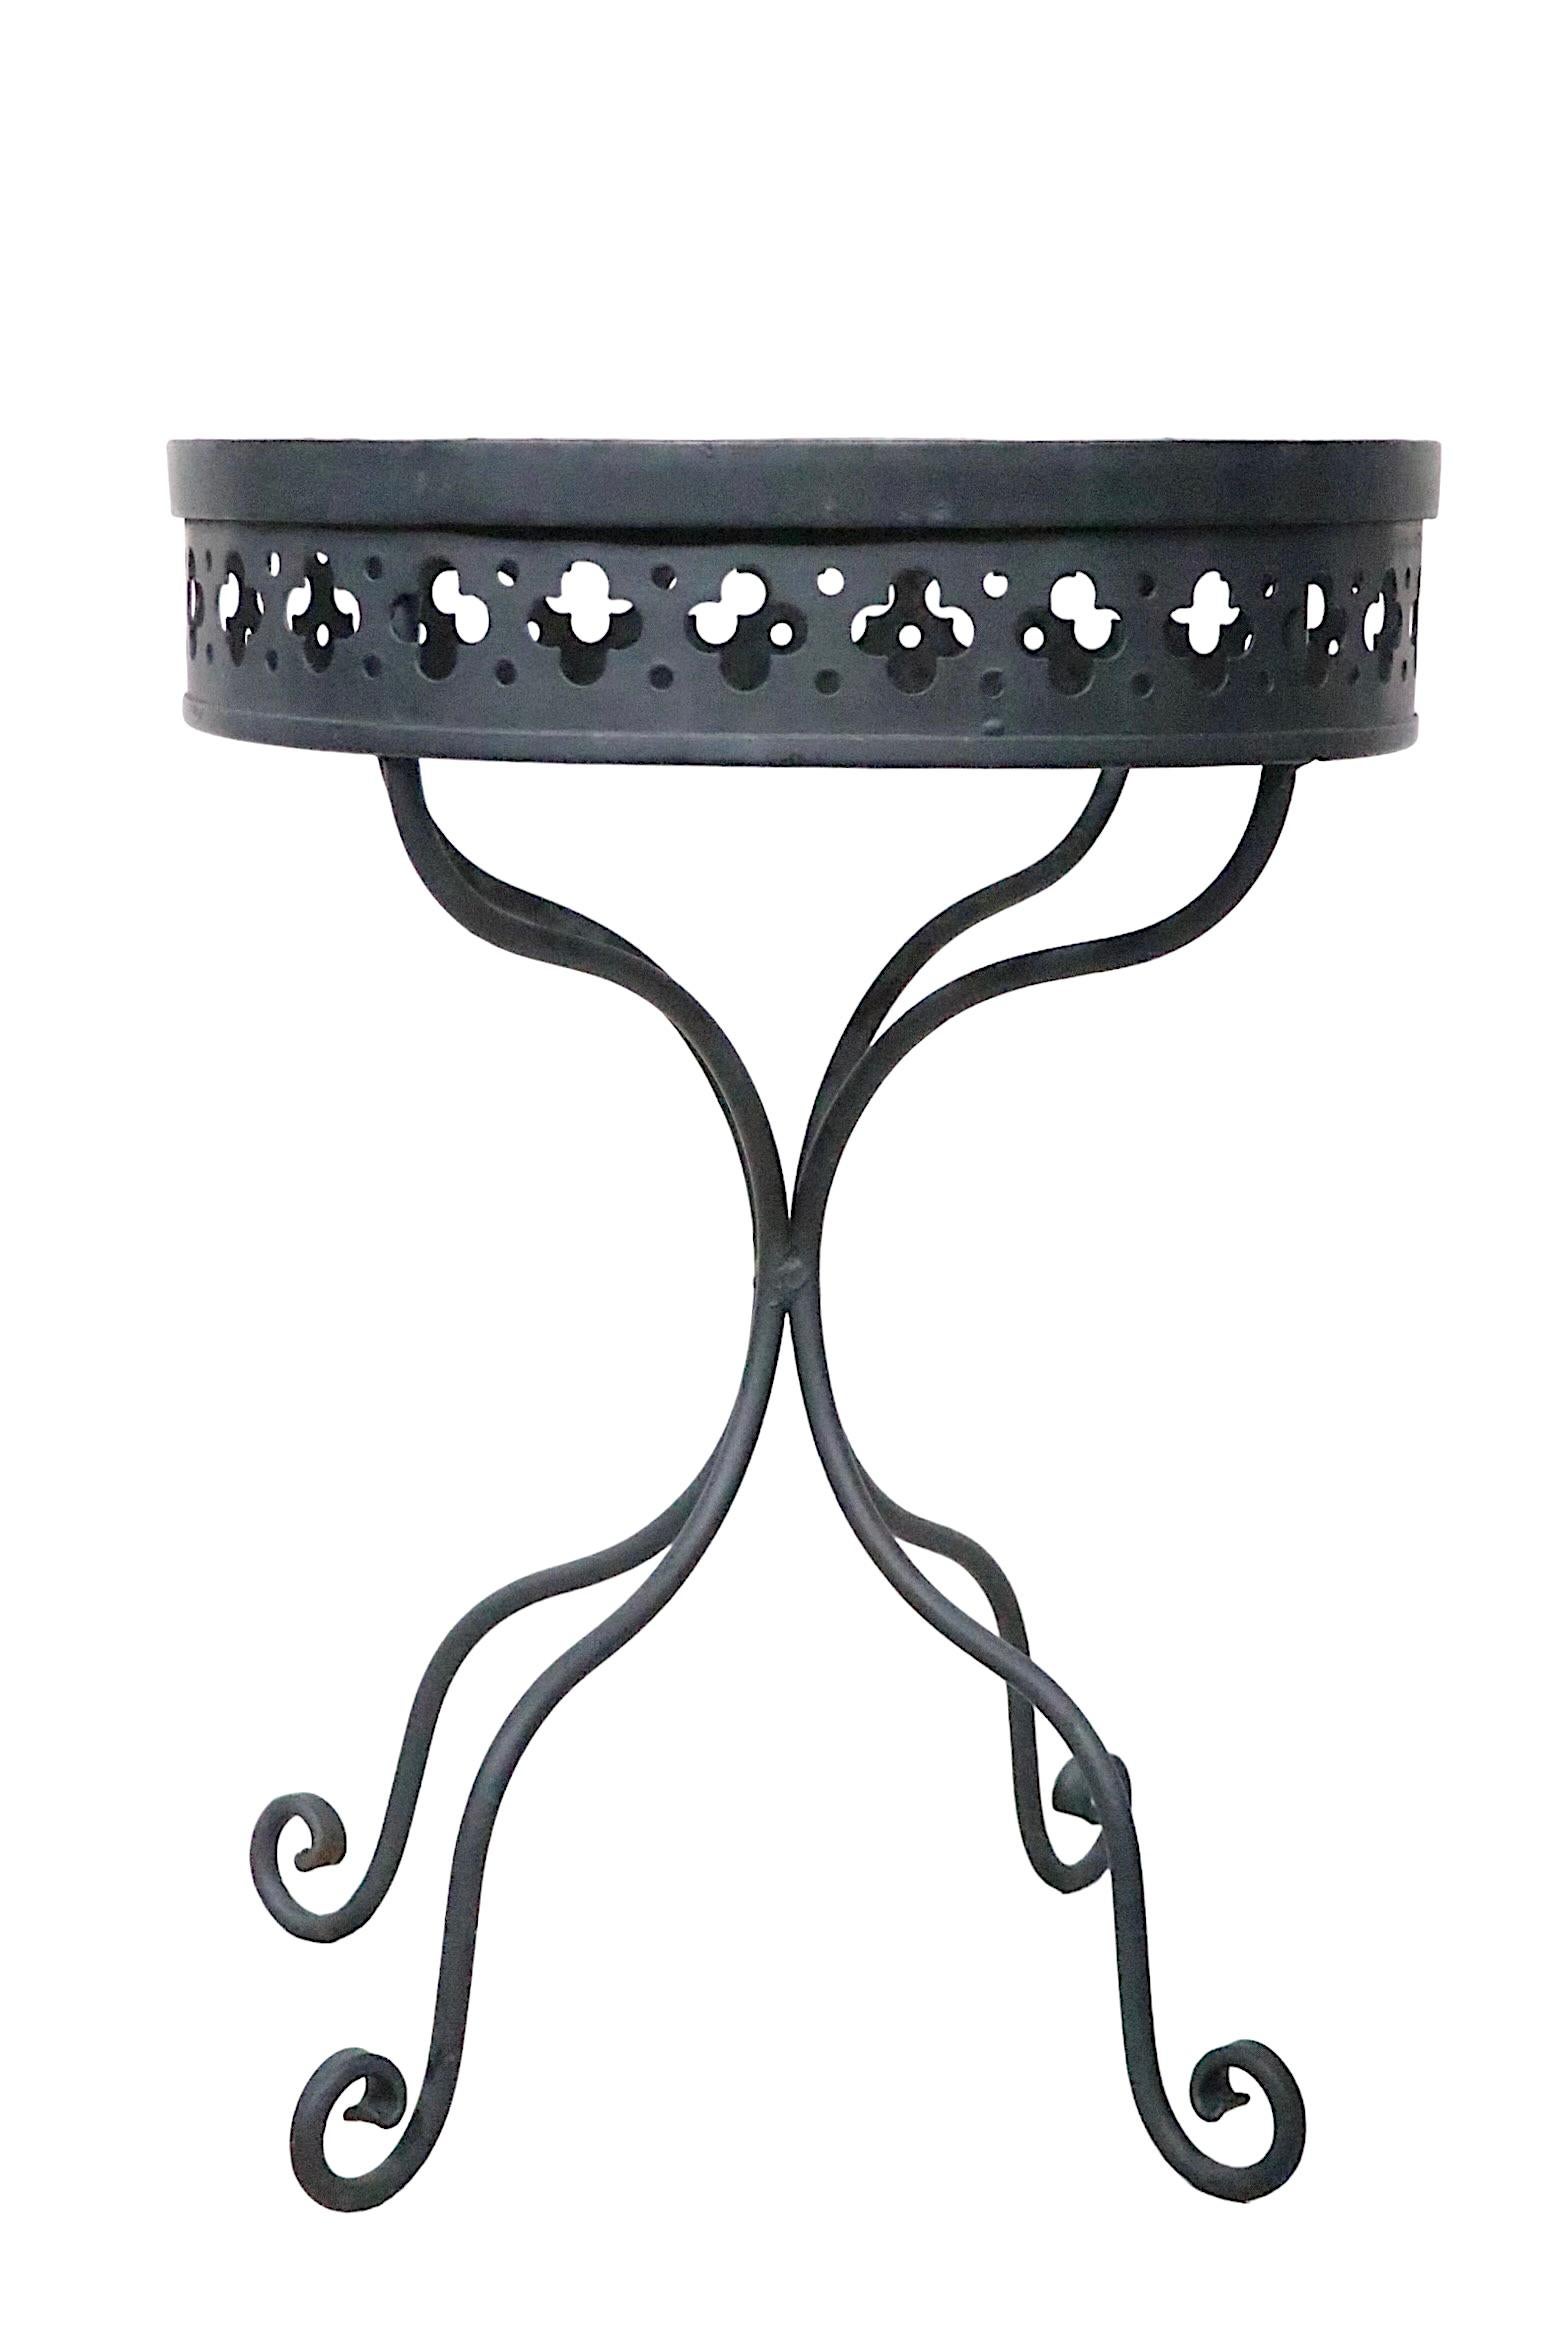 Wrought Iron and Metal Mesh Garden Patio Side End Table Taj Mahal by Salterini For Sale 2